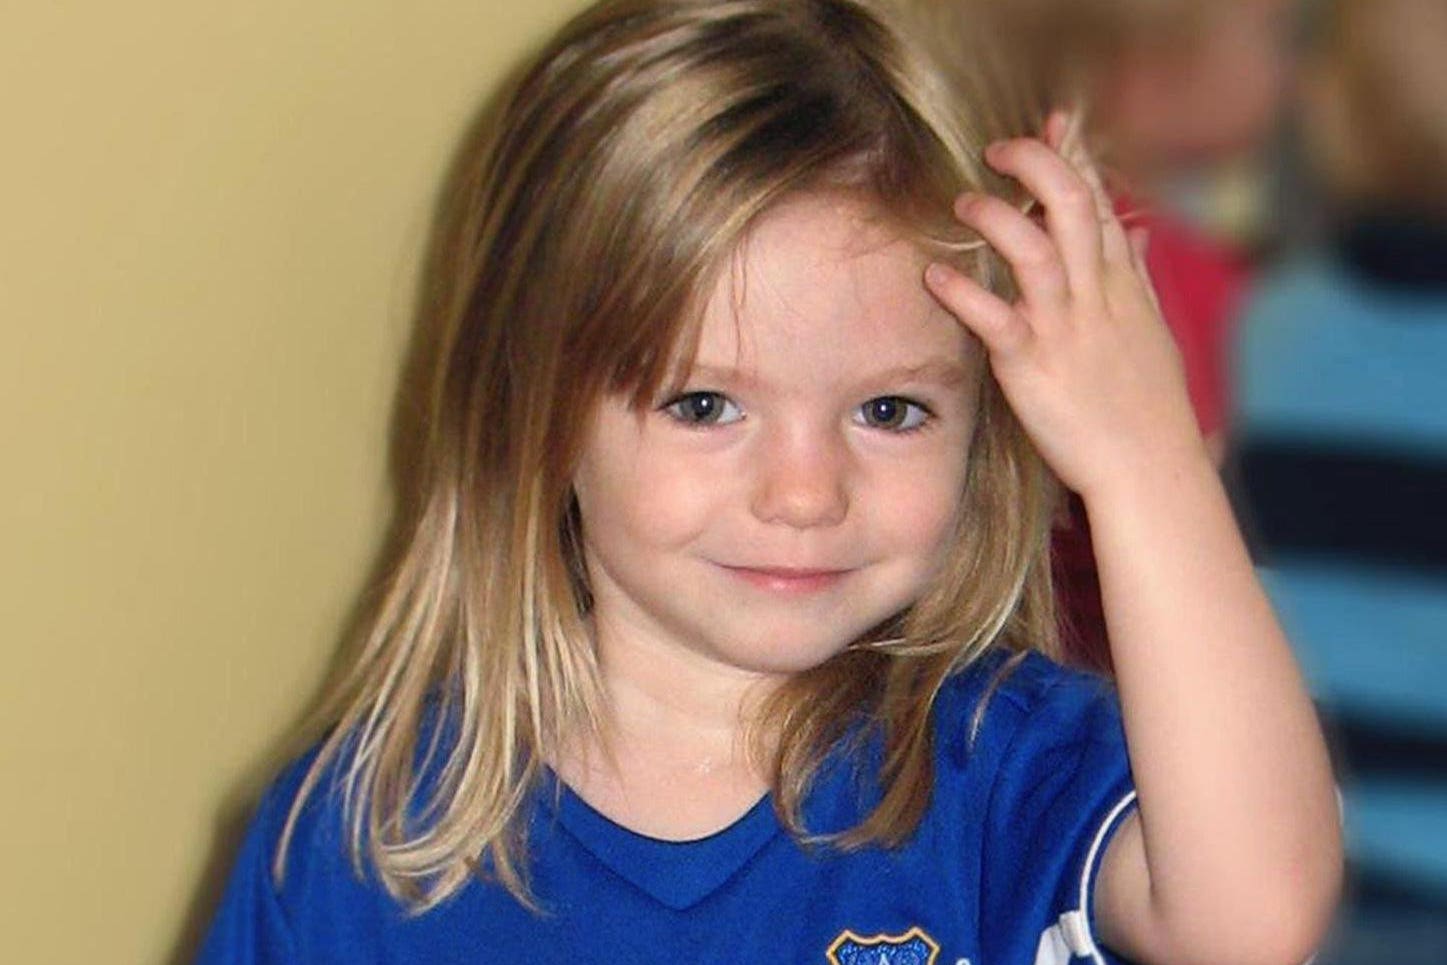 The prime suspect in the disappearance of Madeleine McCann has now been charged with sexual offences against children